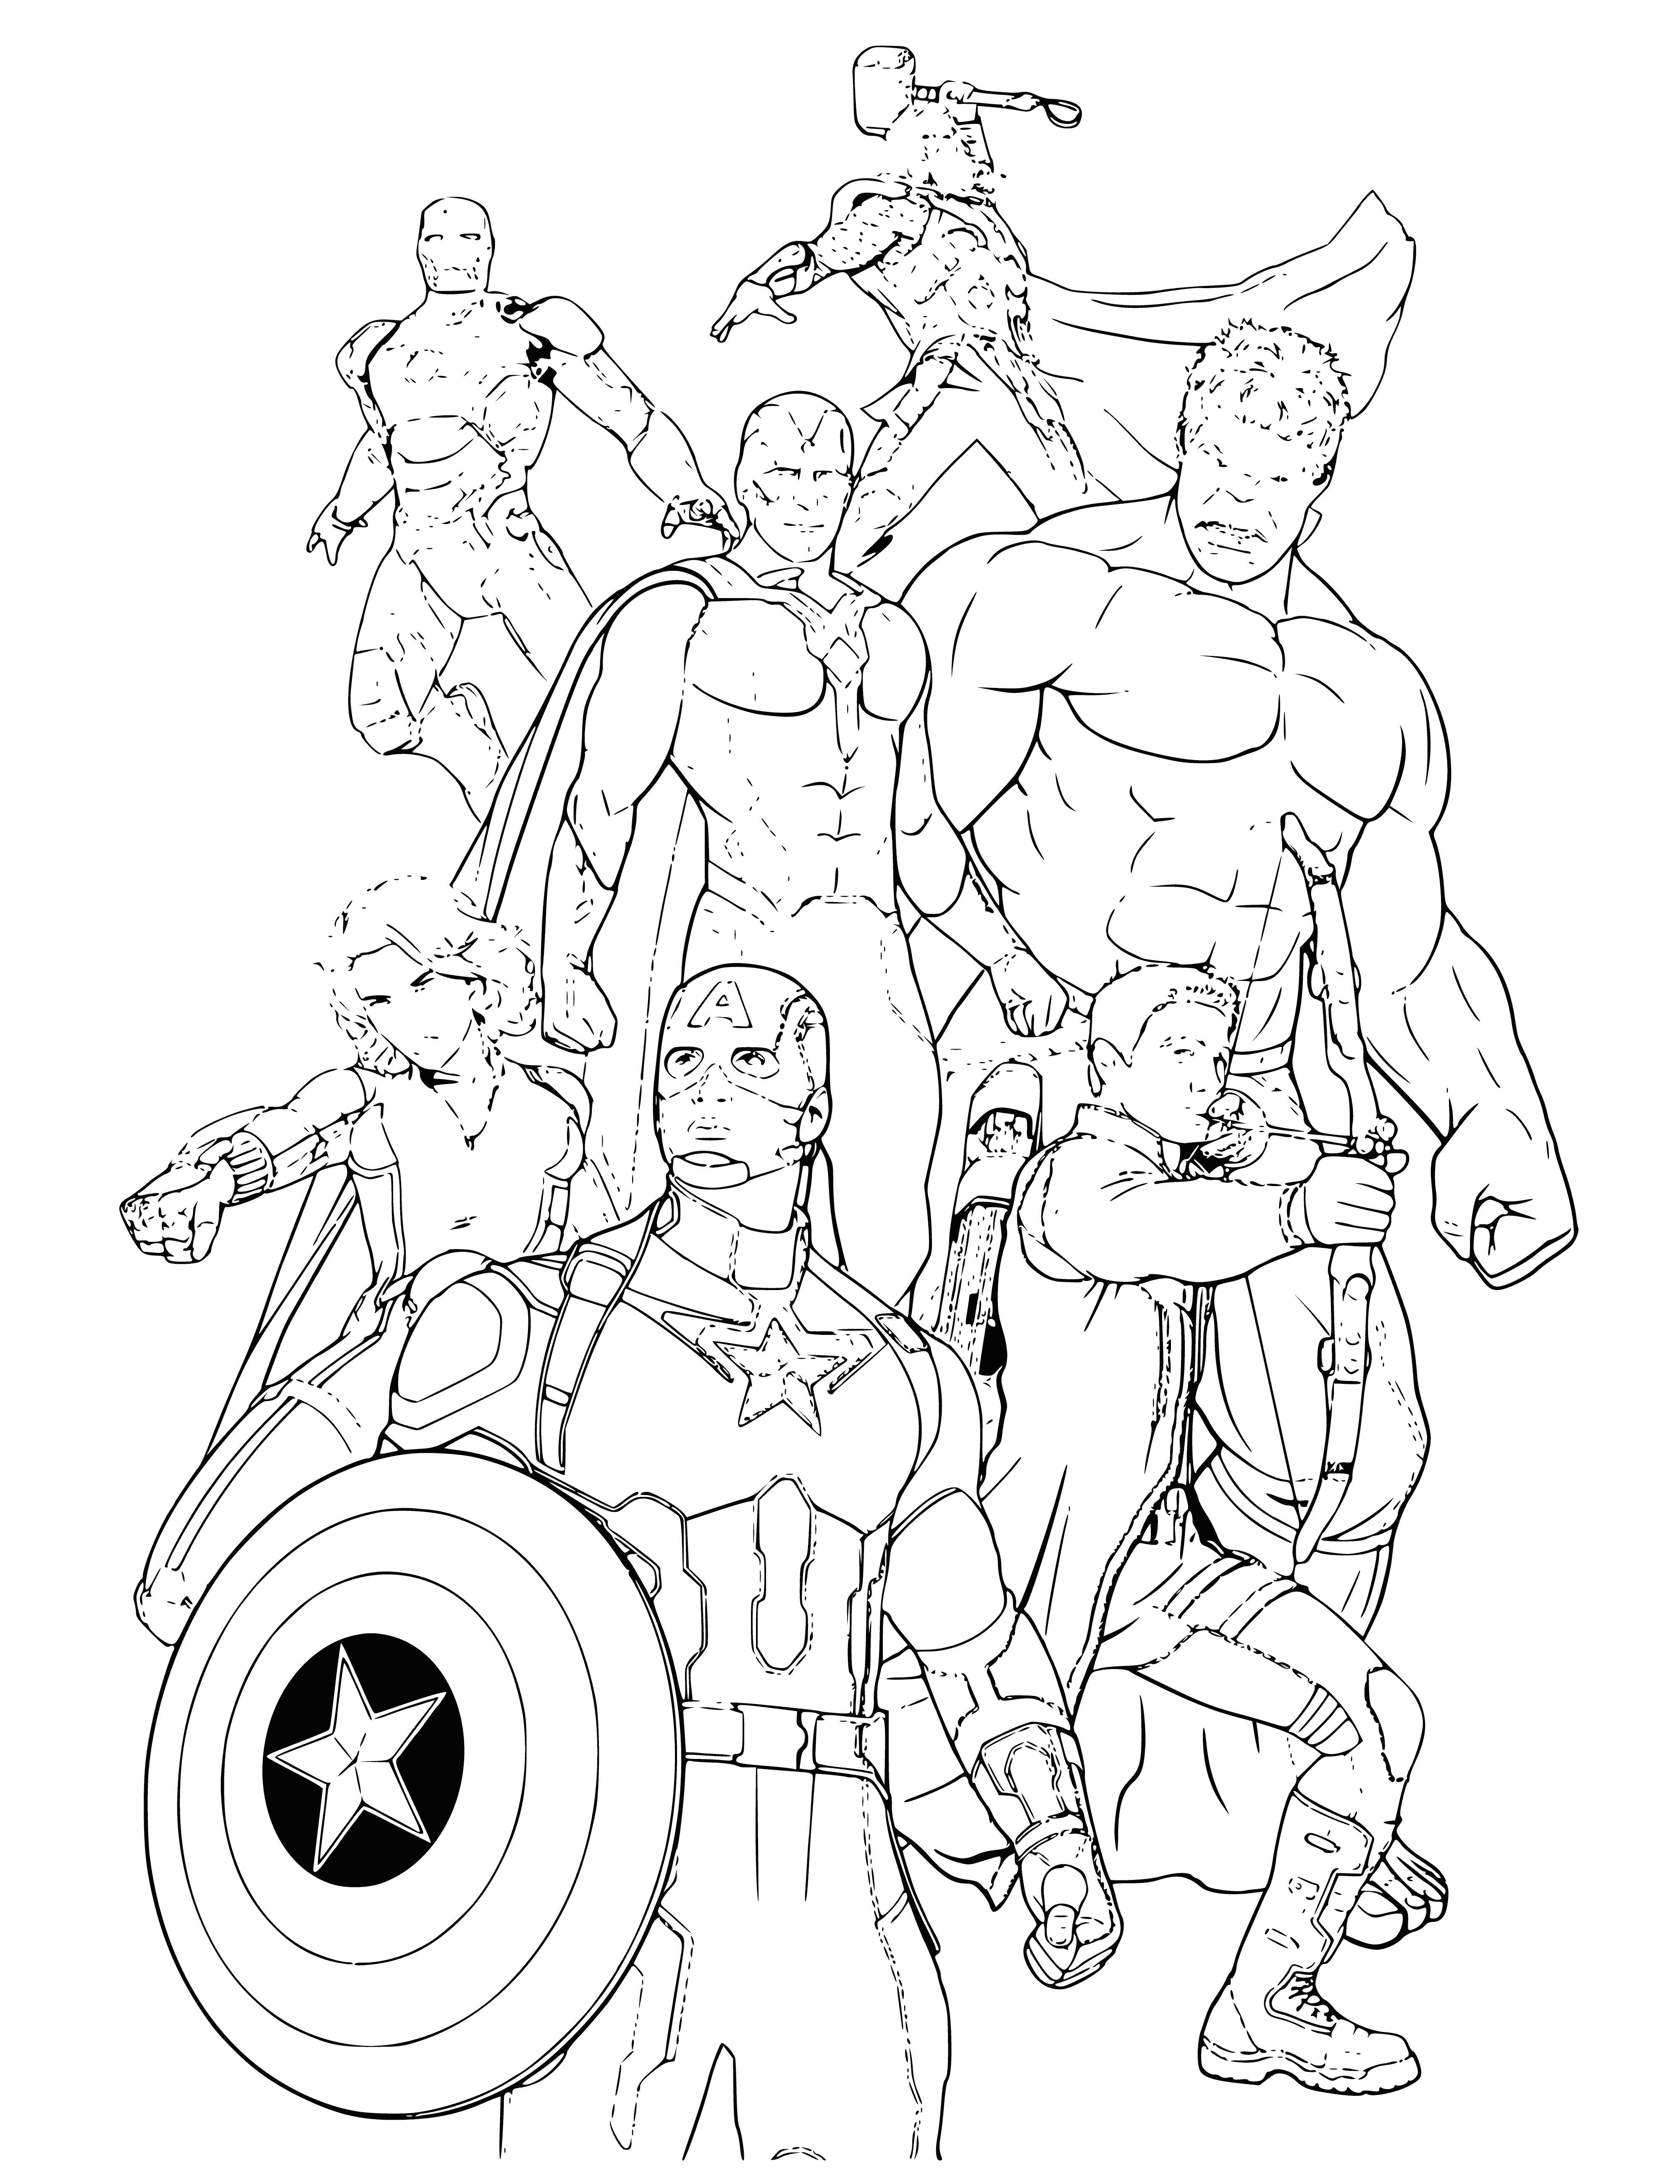 coloring page: The Avengers are a team of superheroes that come together to protect the world from threats too big for any one hero to handle.